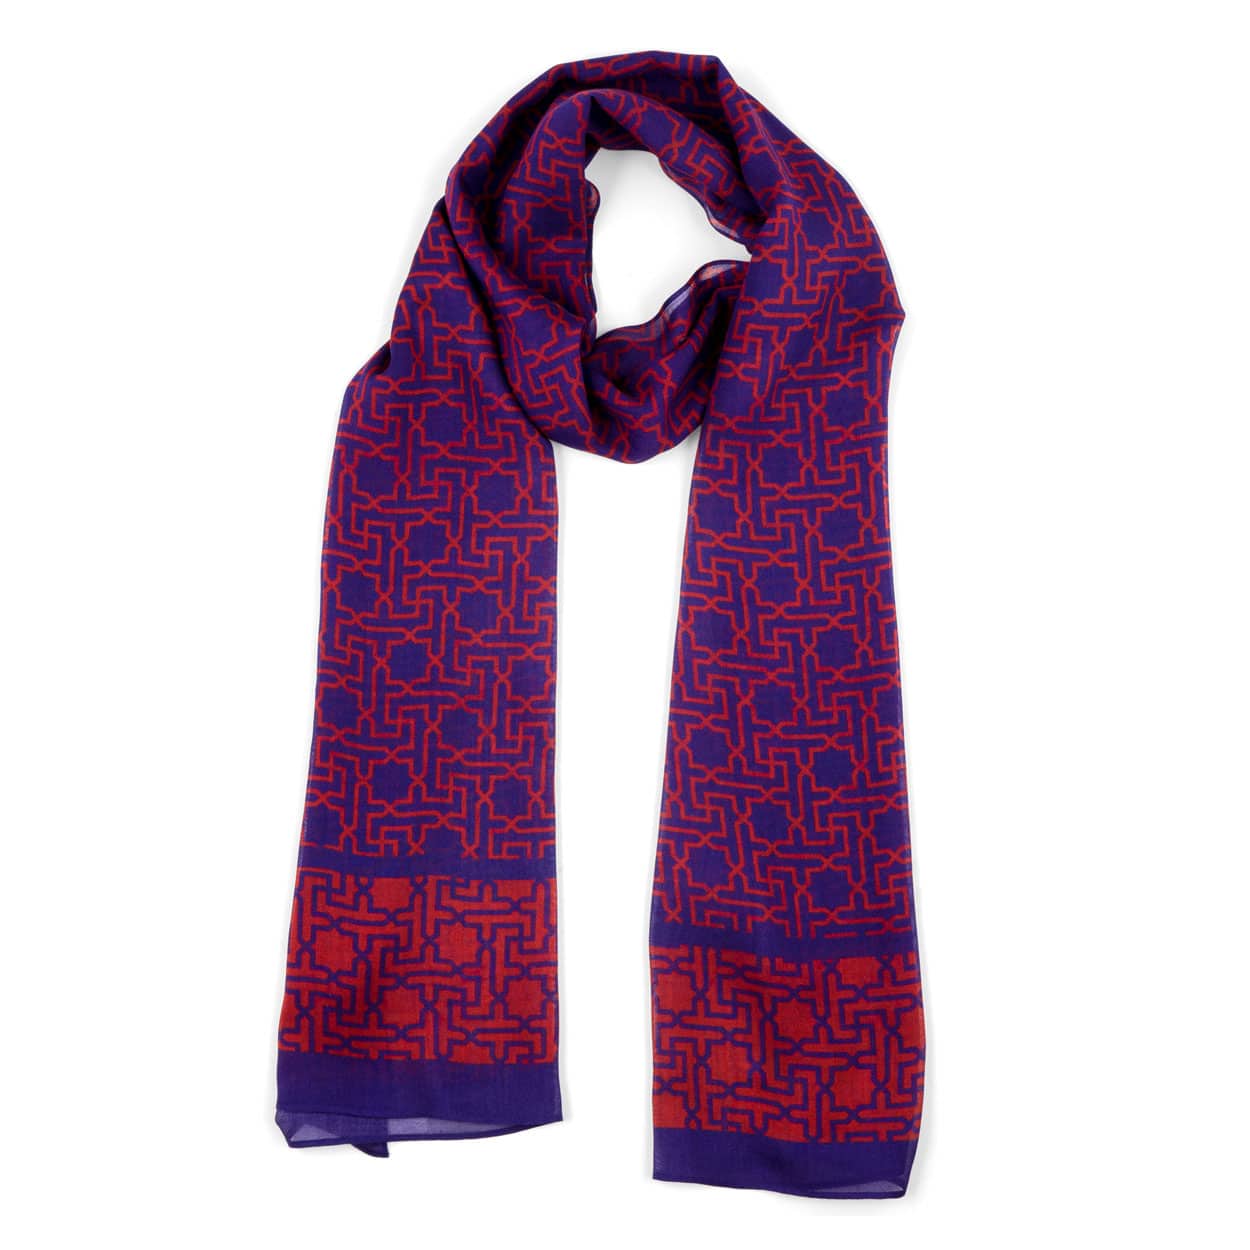 Blue and red scarf with print inspired by the Alhambra of Granada